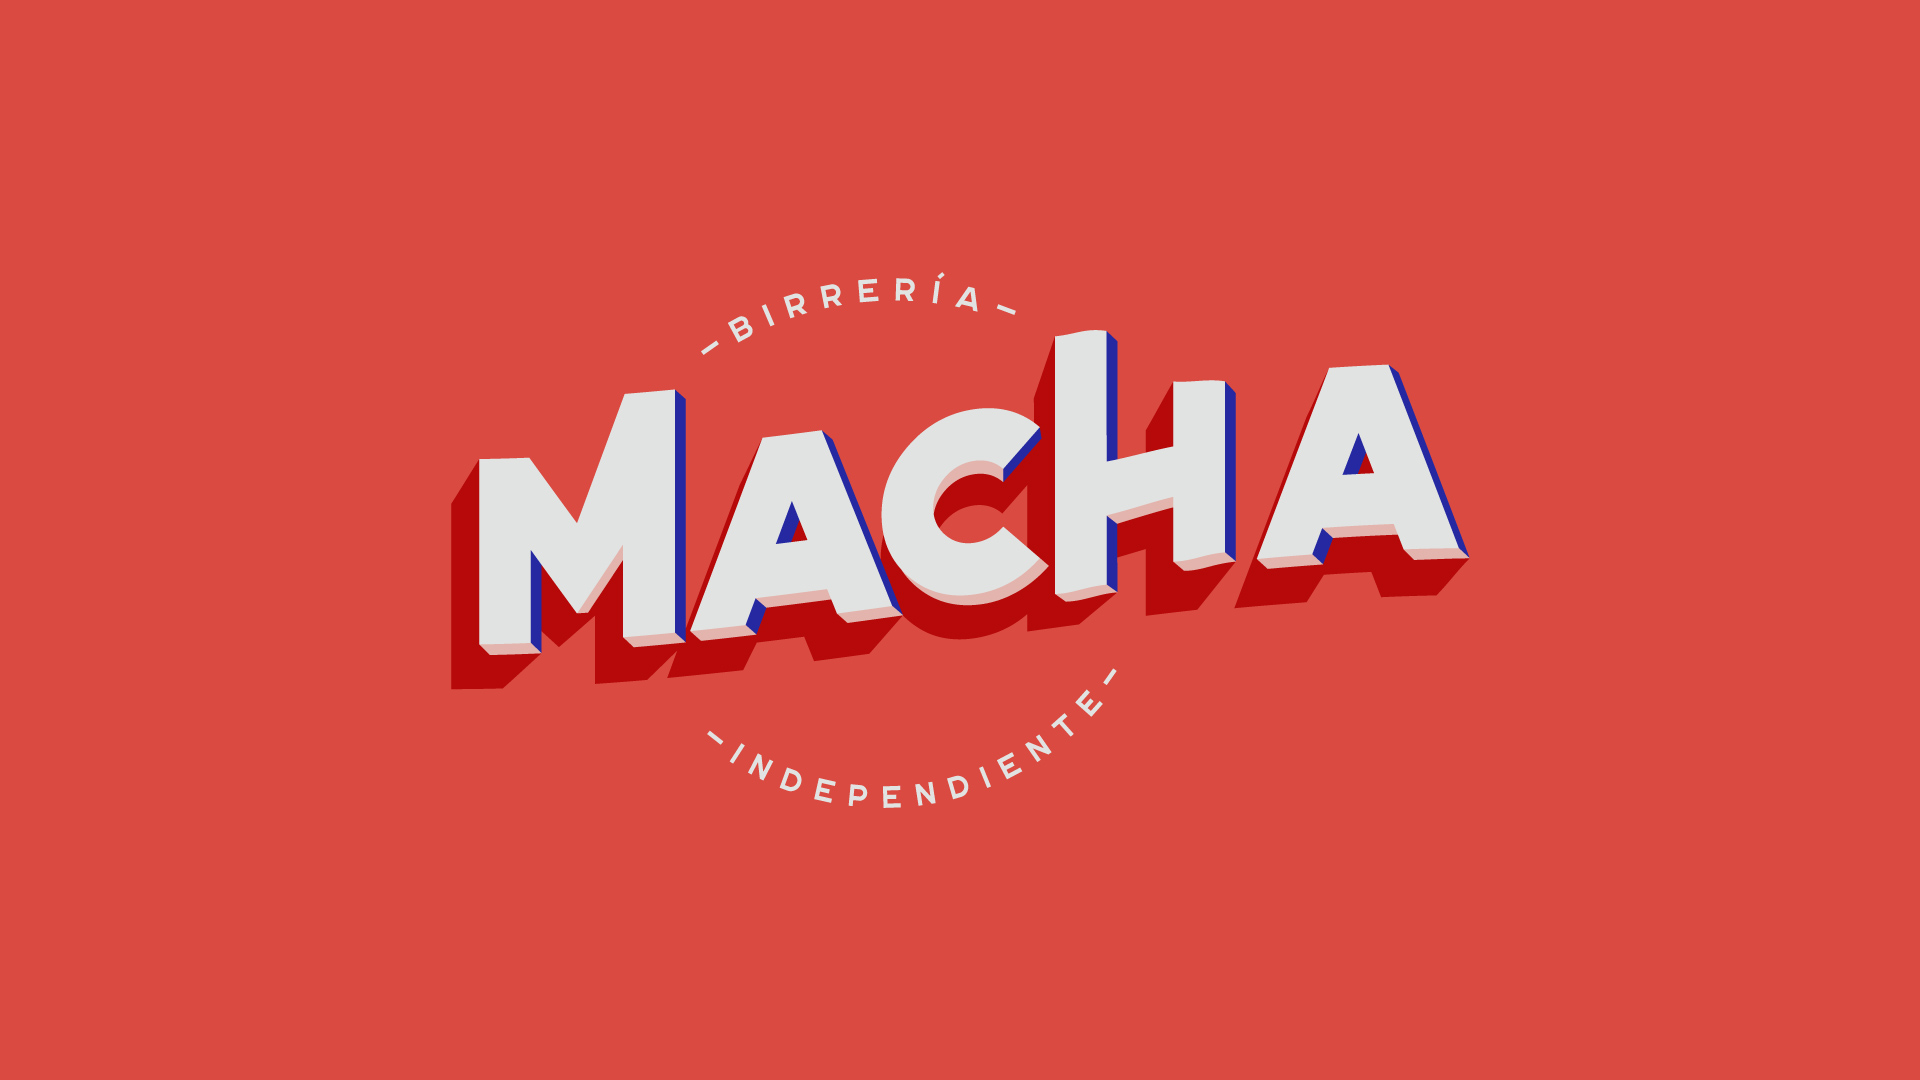 Macha Craft Brewery Brand Identity and Packaging Design by Mellow & Banana